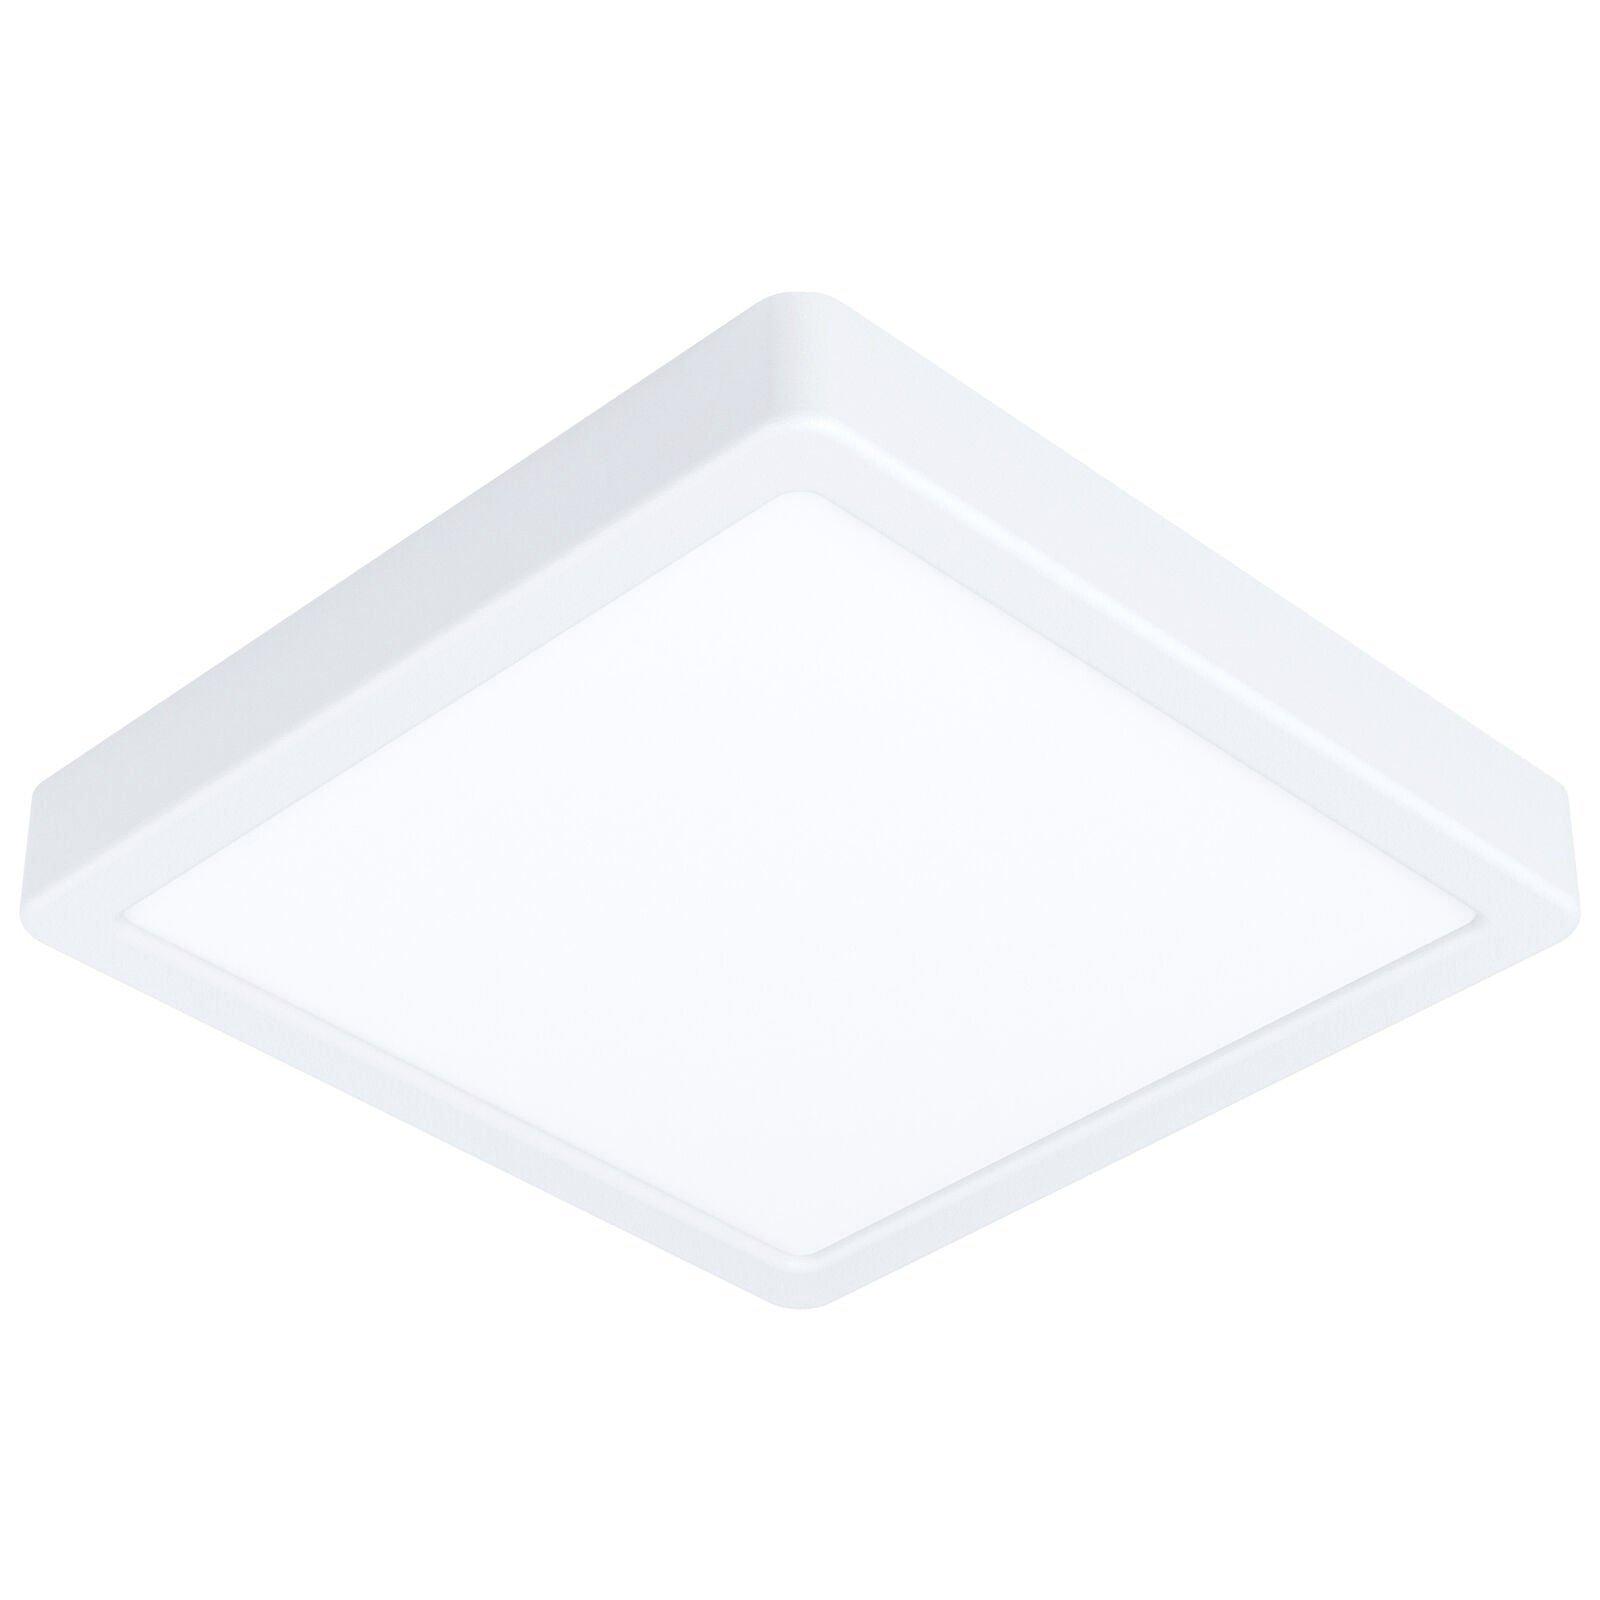 Wall / Ceiling Light White 210mm Square Surface Mounted 16.5W LED 4000K